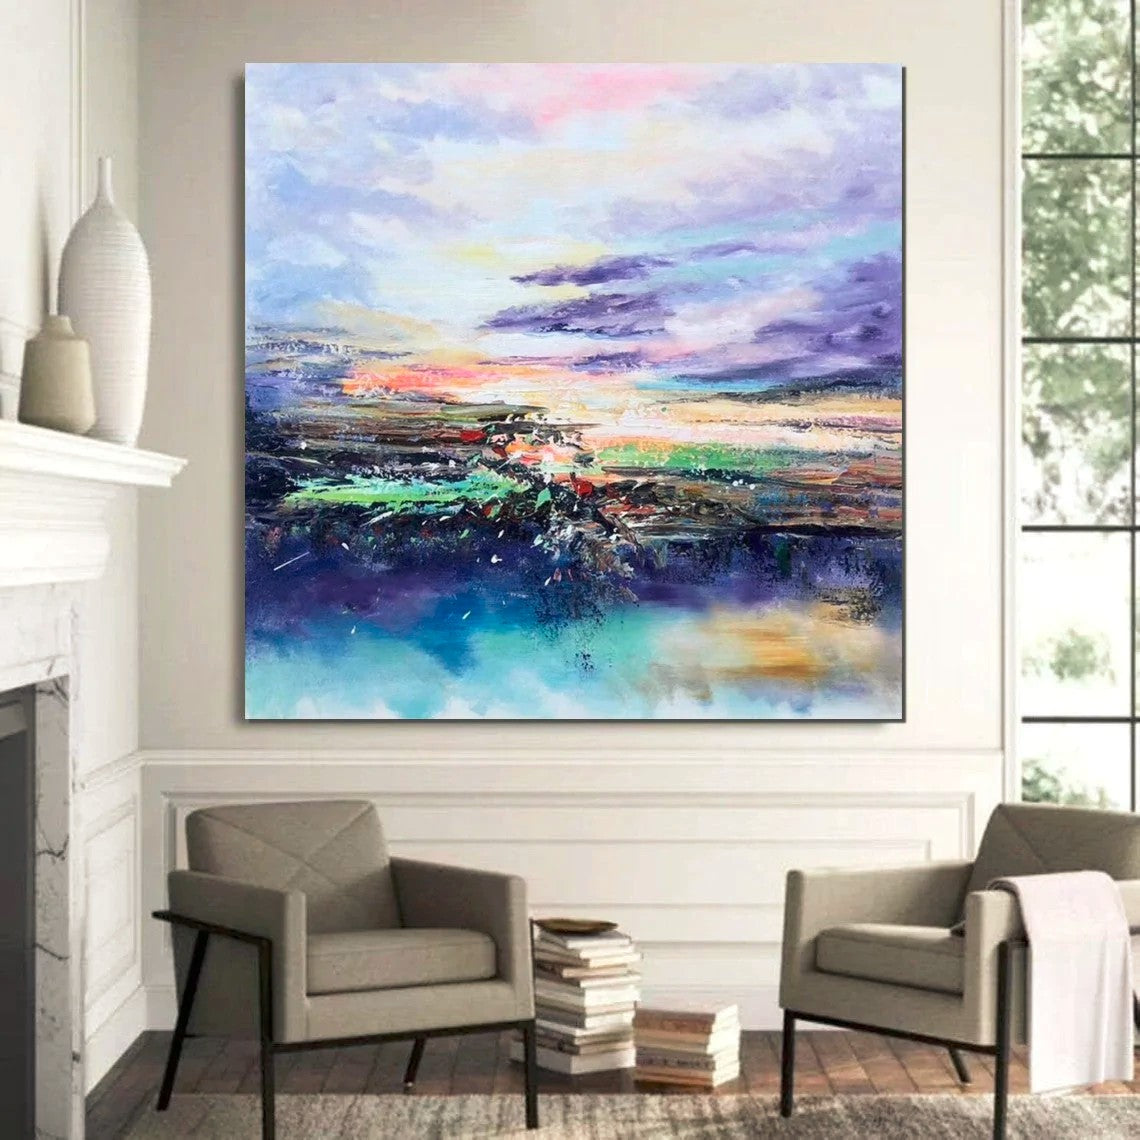 Modern Paintings for Bedroom, Acrylic Paintings for Living Room, Simple Painting Ideas for Living Room, Large Wall Art Ideas for Dining Room, Acrylic Painting on Canvas